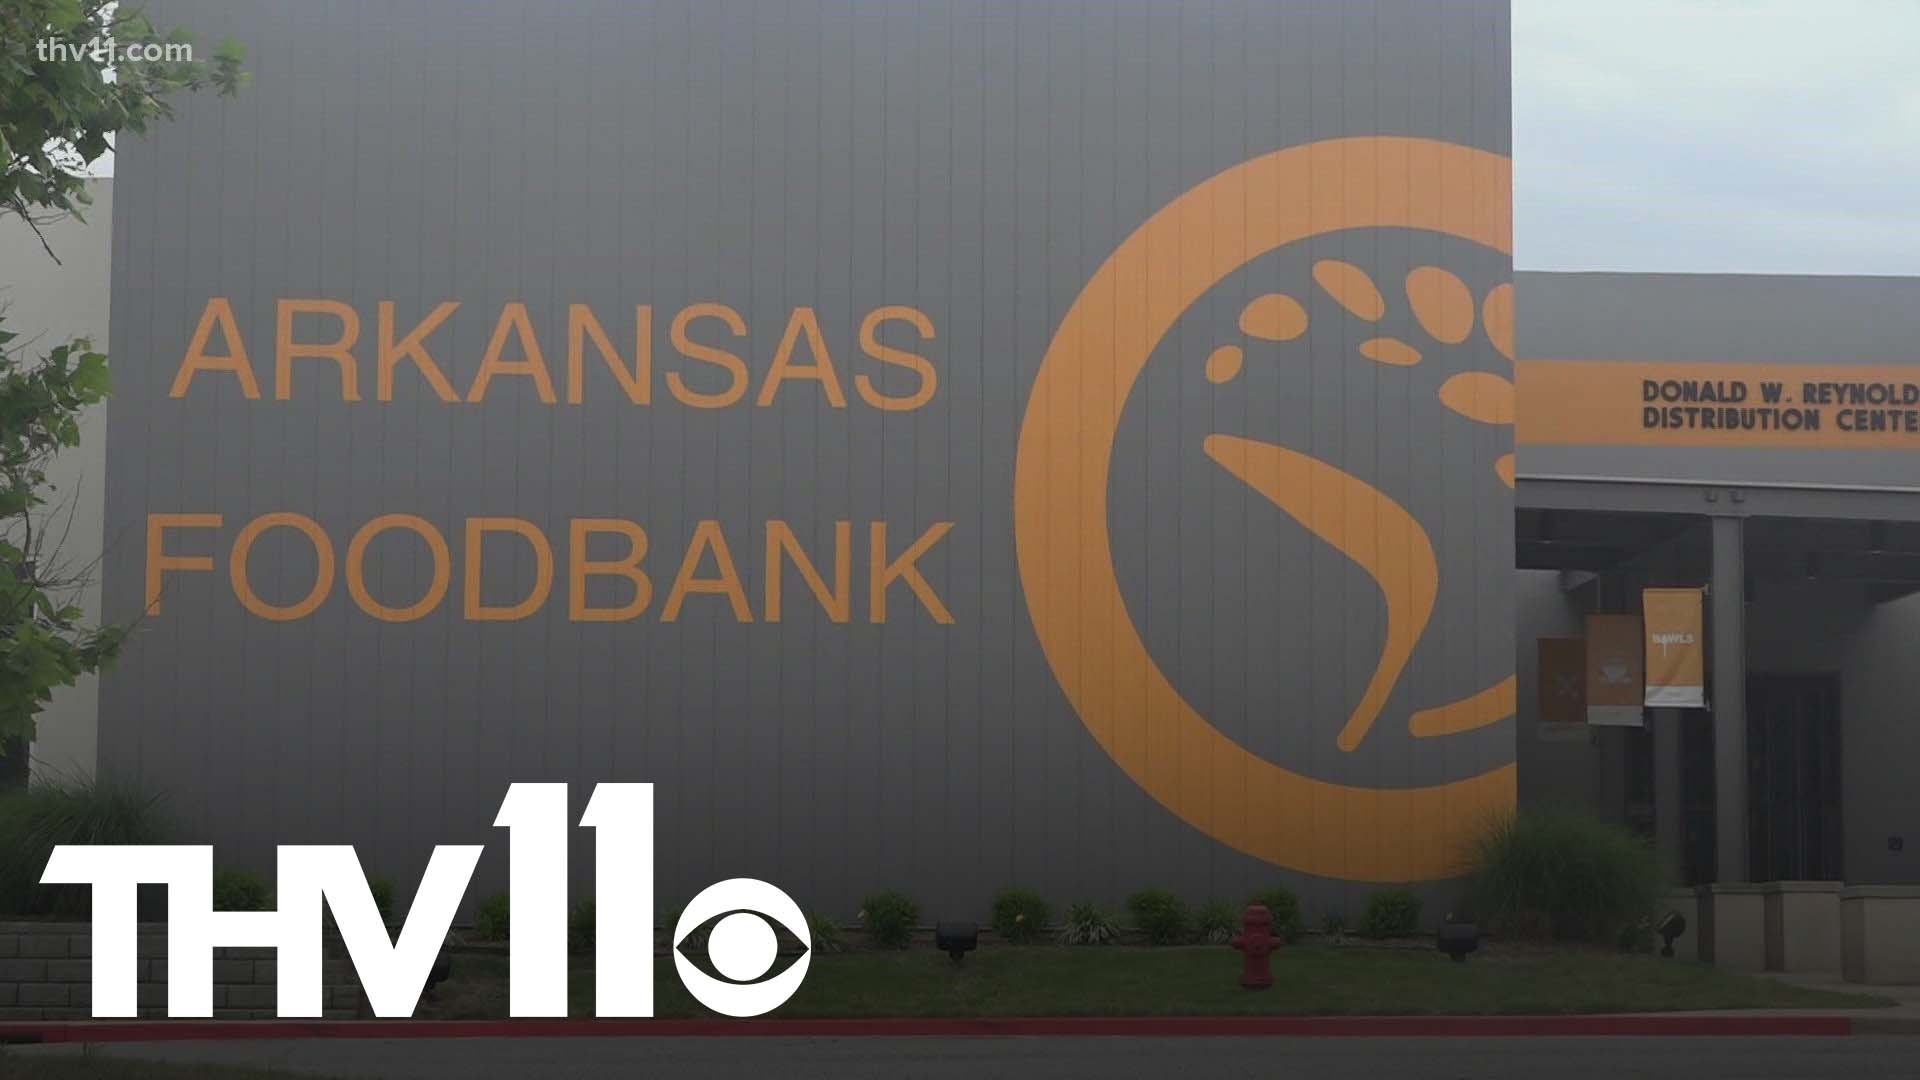 The Arkansas Food Bank is feeling the impact of an increased need by those in the state along with inflation--this is causing their shelves to become empty.